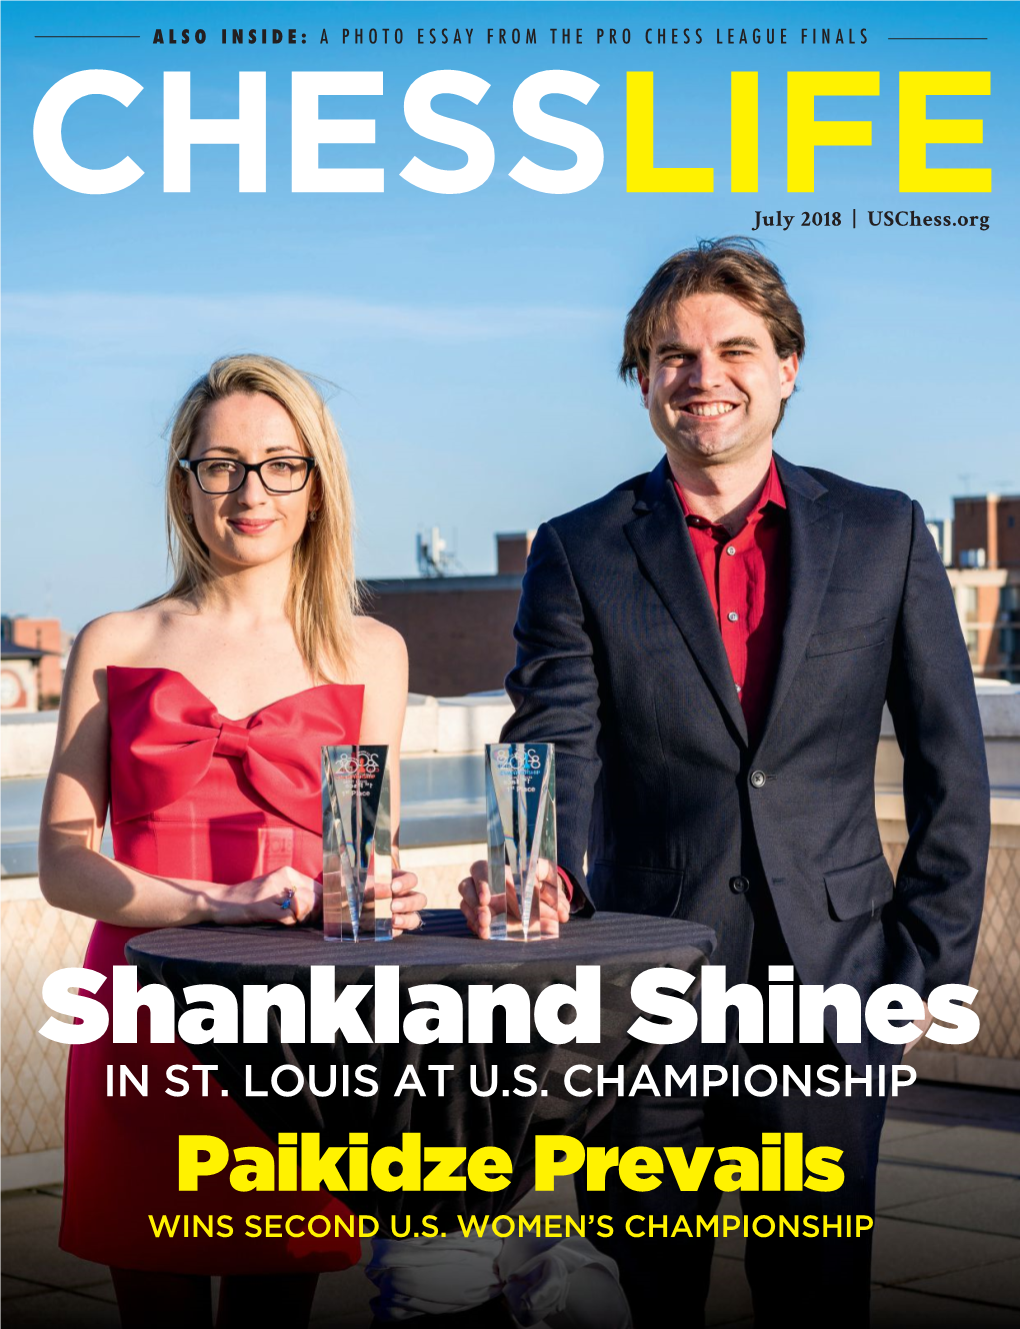 Shankland Shines in ST